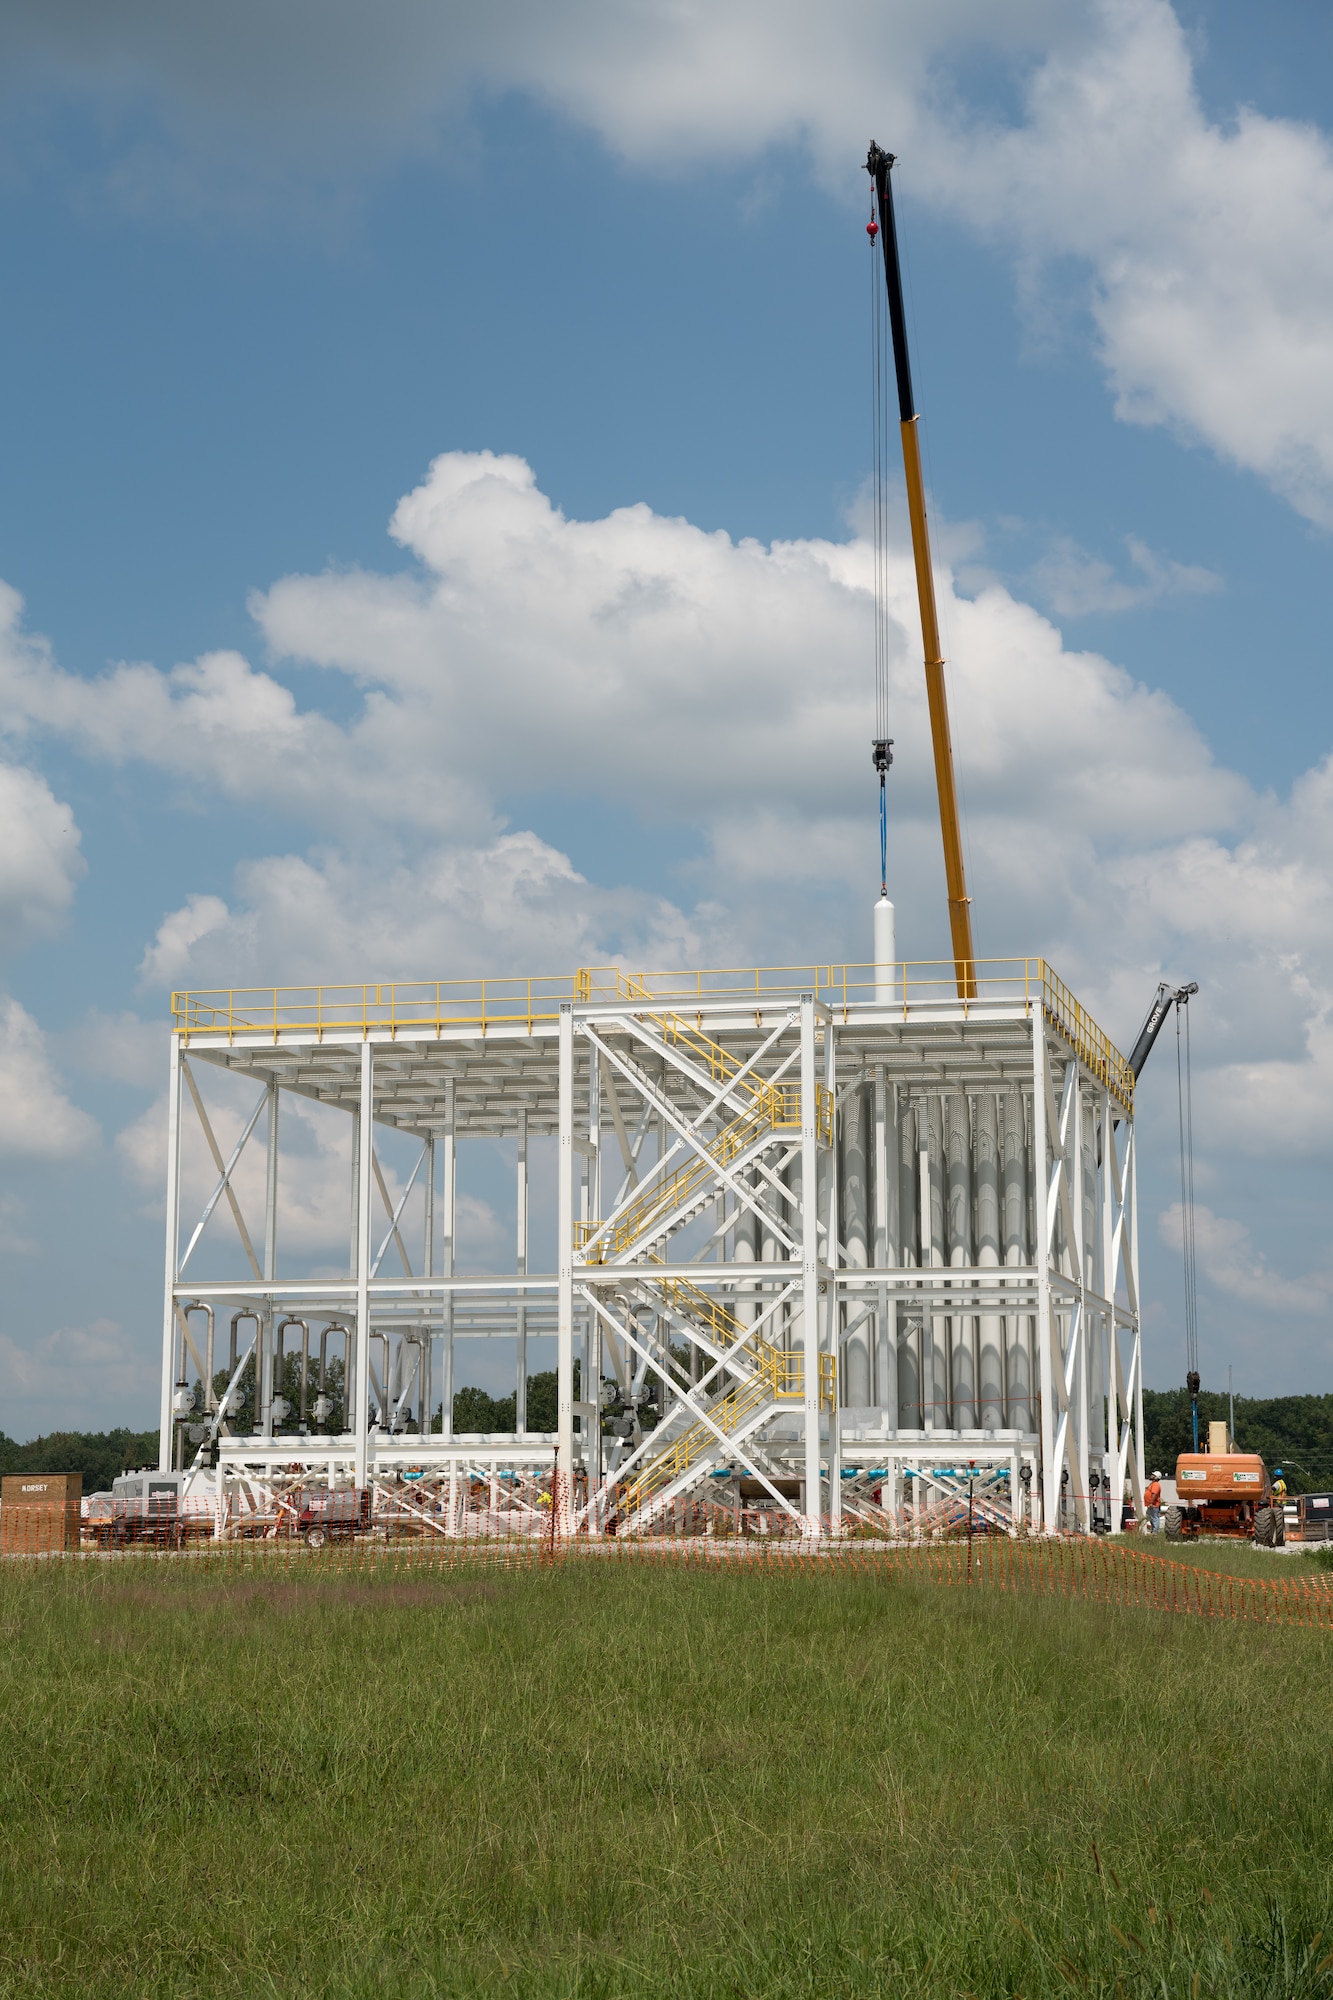 A high-pressure air (HPA) bottle is lifted and lowered into place in the J-5 test facility bottle farm, Aug. 26, 2021, at Arnold Air Force Base, Tenn. The bottle farm will be tied into the HPA distribution network at Arnold AFB to provide other test facilities access to the resource. (U.S. Air Force photo by Jill Pickett)